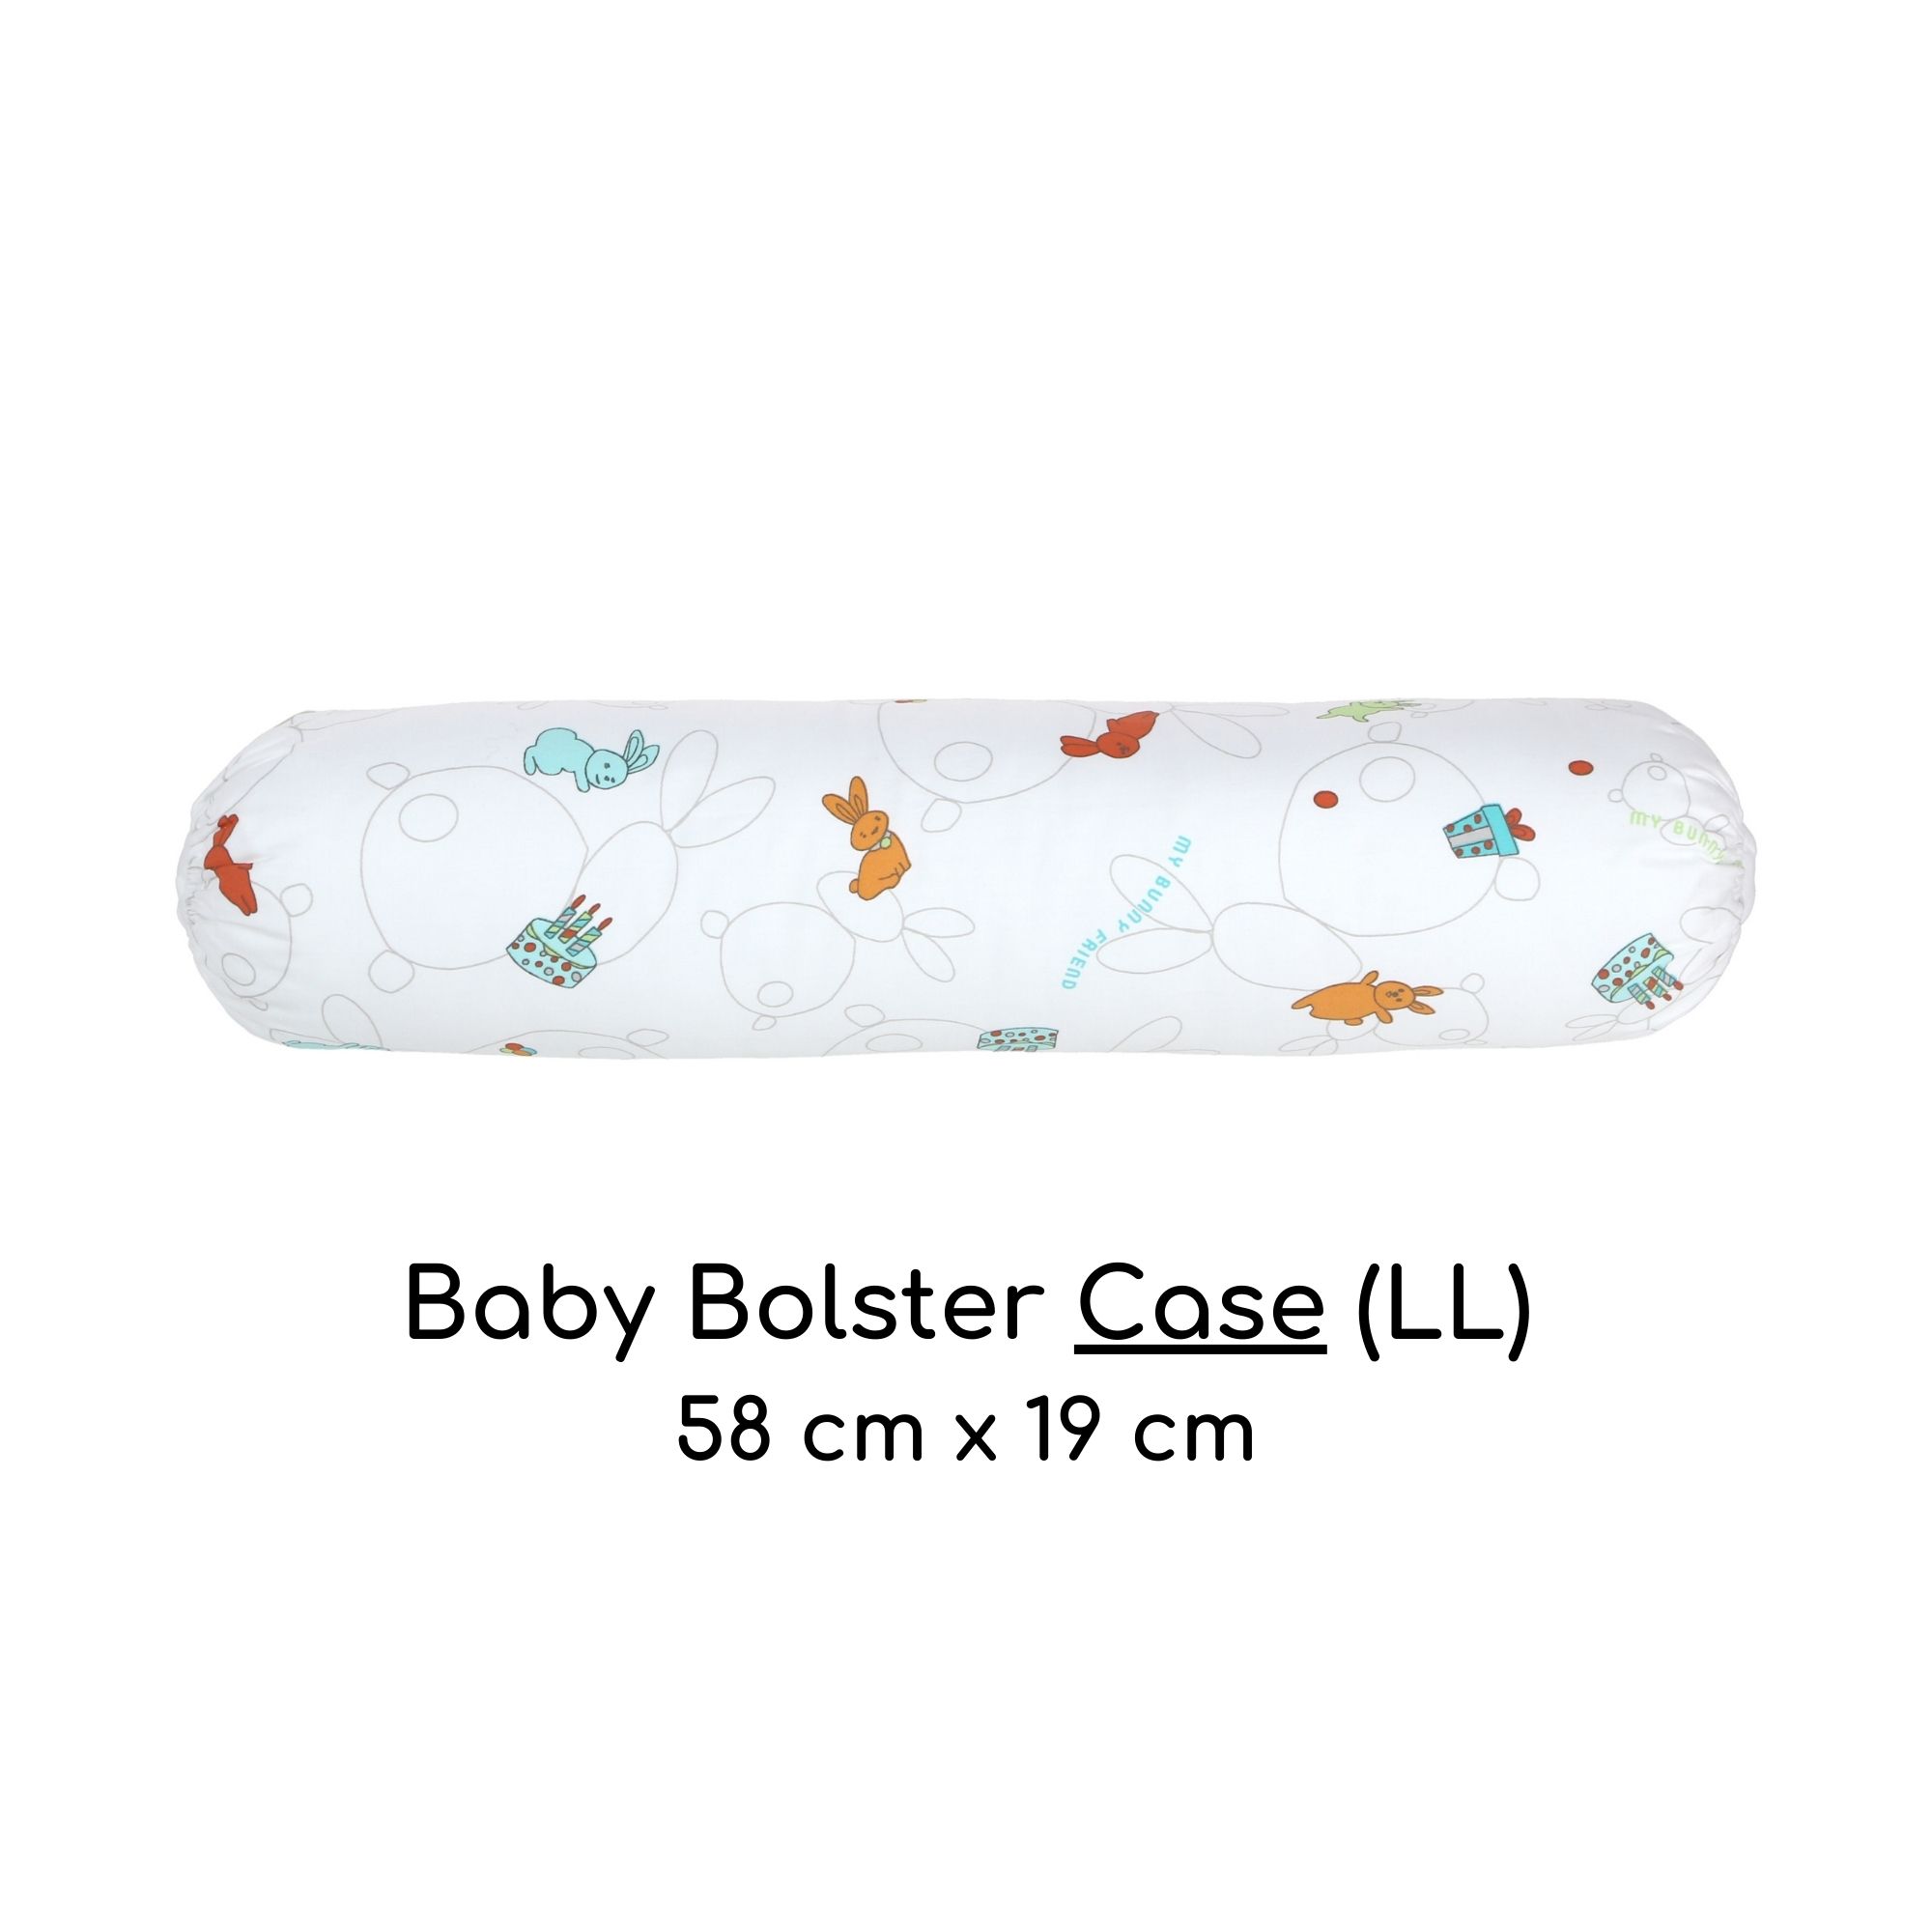 My Bunny Friend Baby Bolster Case (LL) (19x58cm) - Bunny Party